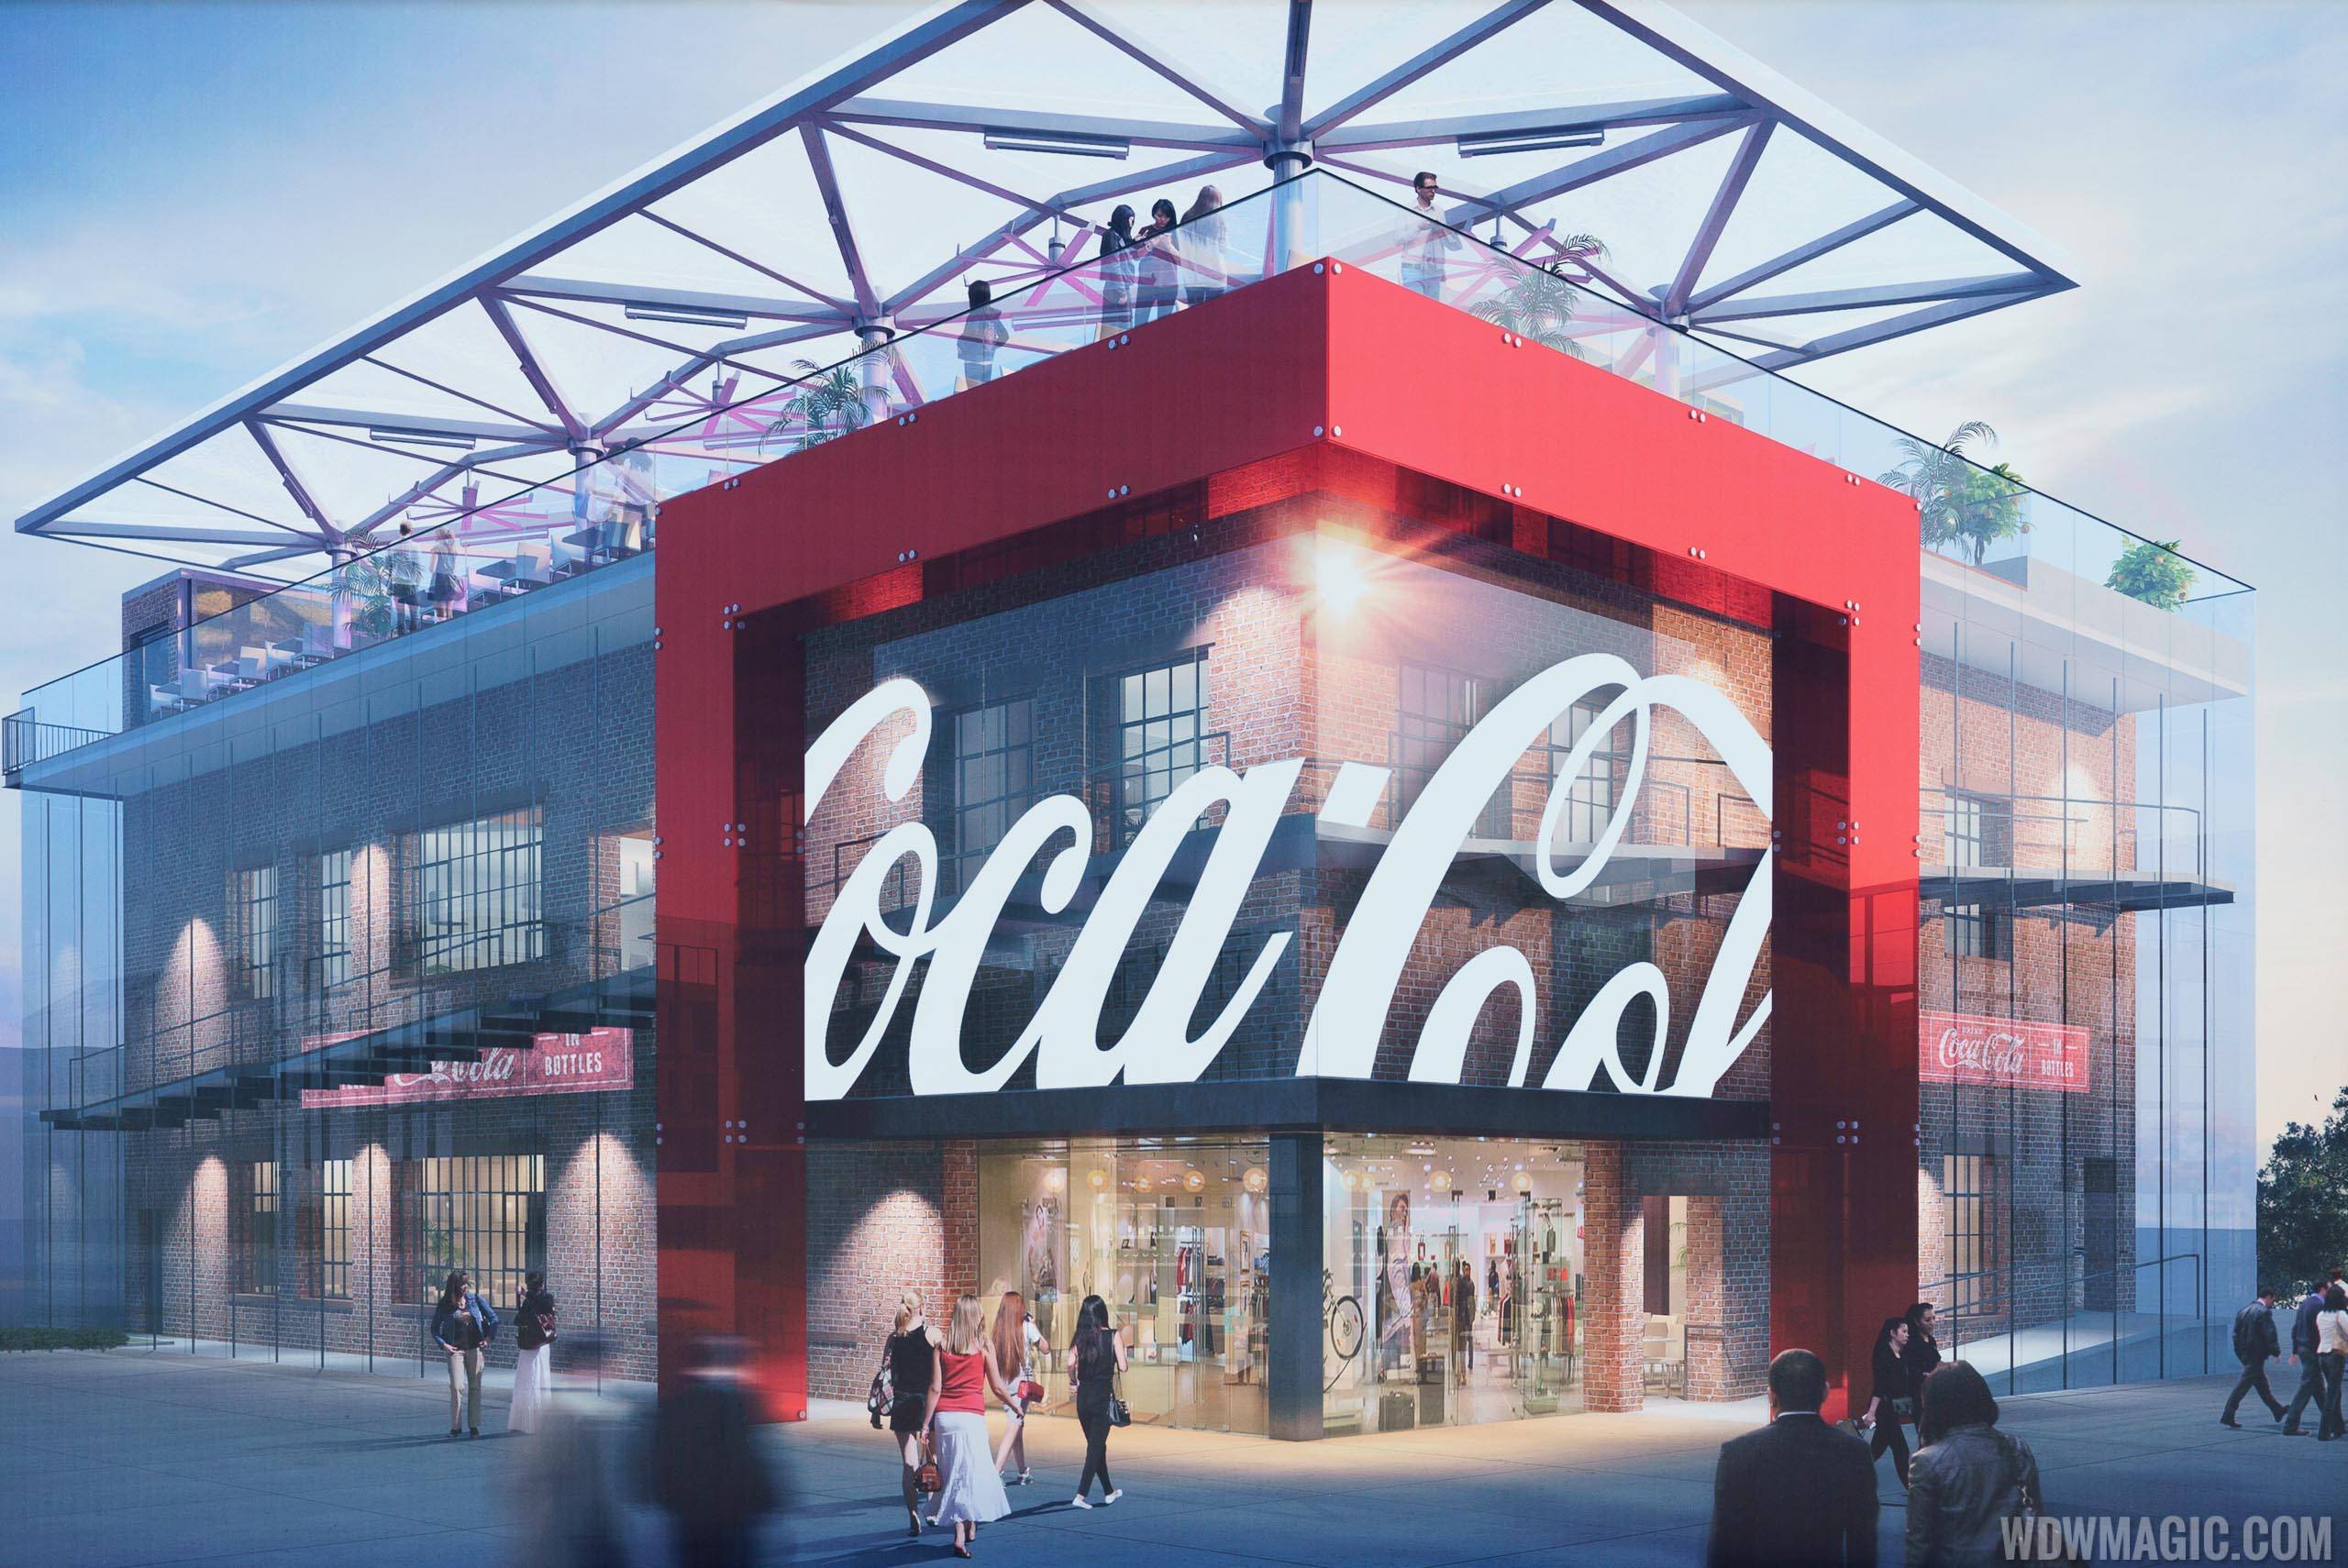 PHOTOS - New concept art and Coca-Cola Store construction update from Disney Springs